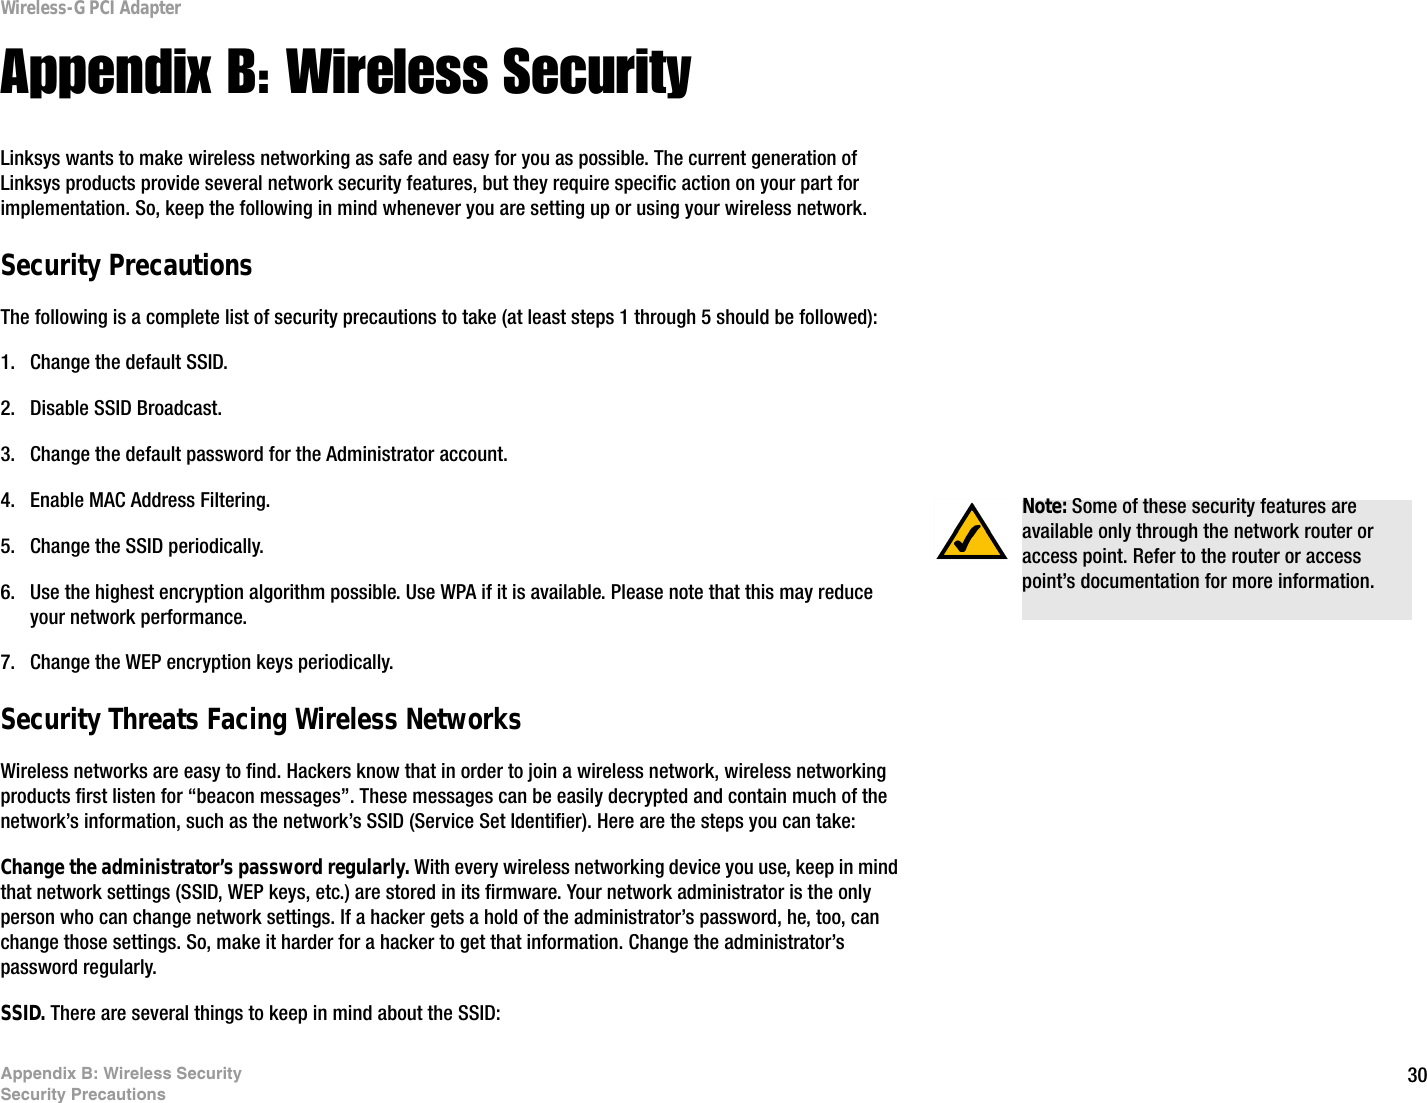 30Appendix B: Wireless SecuritySecurity PrecautionsWireless-G PCI AdapterAppendix B: Wireless SecurityLinksys wants to make wireless networking as safe and easy for you as possible. The current generation of Linksys products provide several network security features, but they require specific action on your part for implementation. So, keep the following in mind whenever you are setting up or using your wireless network.Security PrecautionsThe following is a complete list of security precautions to take (at least steps 1 through 5 should be followed):1. Change the default SSID. 2. Disable SSID Broadcast. 3. Change the default password for the Administrator account. 4. Enable MAC Address Filtering. 5. Change the SSID periodically. 6. Use the highest encryption algorithm possible. Use WPA if it is available. Please note that this may reduce your network performance. 7. Change the WEP encryption keys periodically. Security Threats Facing Wireless Networks Wireless networks are easy to find. Hackers know that in order to join a wireless network, wireless networking products first listen for “beacon messages”. These messages can be easily decrypted and contain much of the network’s information, such as the network’s SSID (Service Set Identifier). Here are the steps you can take:Change the administrator’s password regularly. With every wireless networking device you use, keep in mind that network settings (SSID, WEP keys, etc.) are stored in its firmware. Your network administrator is the only person who can change network settings. If a hacker gets a hold of the administrator’s password, he, too, can change those settings. So, make it harder for a hacker to get that information. Change the administrator’s password regularly.SSID. There are several things to keep in mind about the SSID: Note: Some of these security features are available only through the network router or access point. Refer to the router or access point’s documentation for more information.